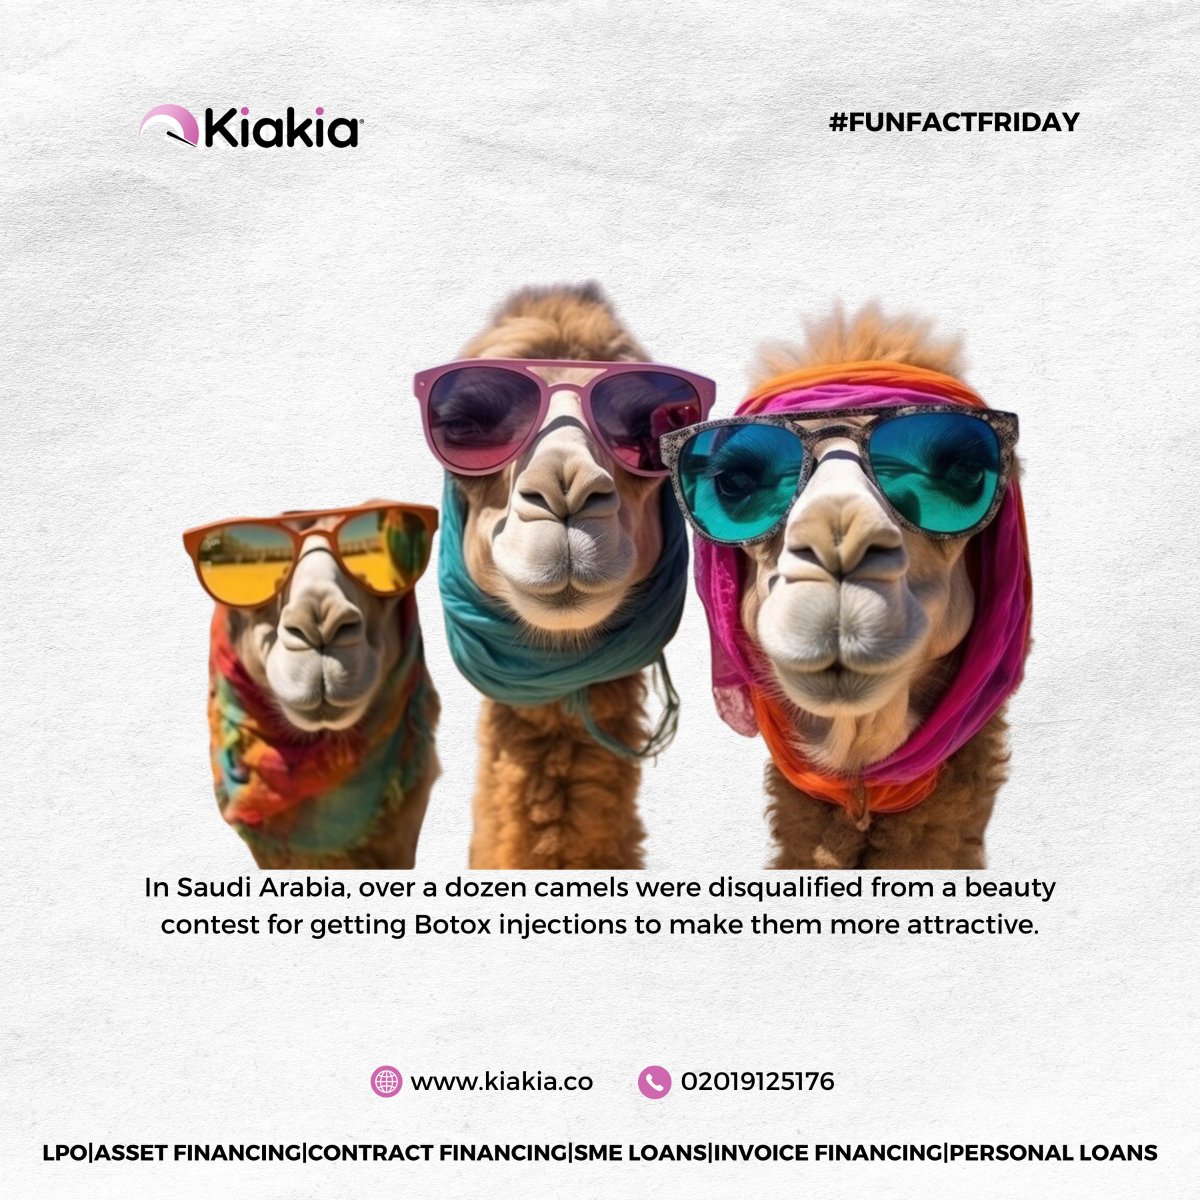 When your camel's beauty regime is more intense than yours. 😂😂😂 

#funfactfriday #kiakiafriday